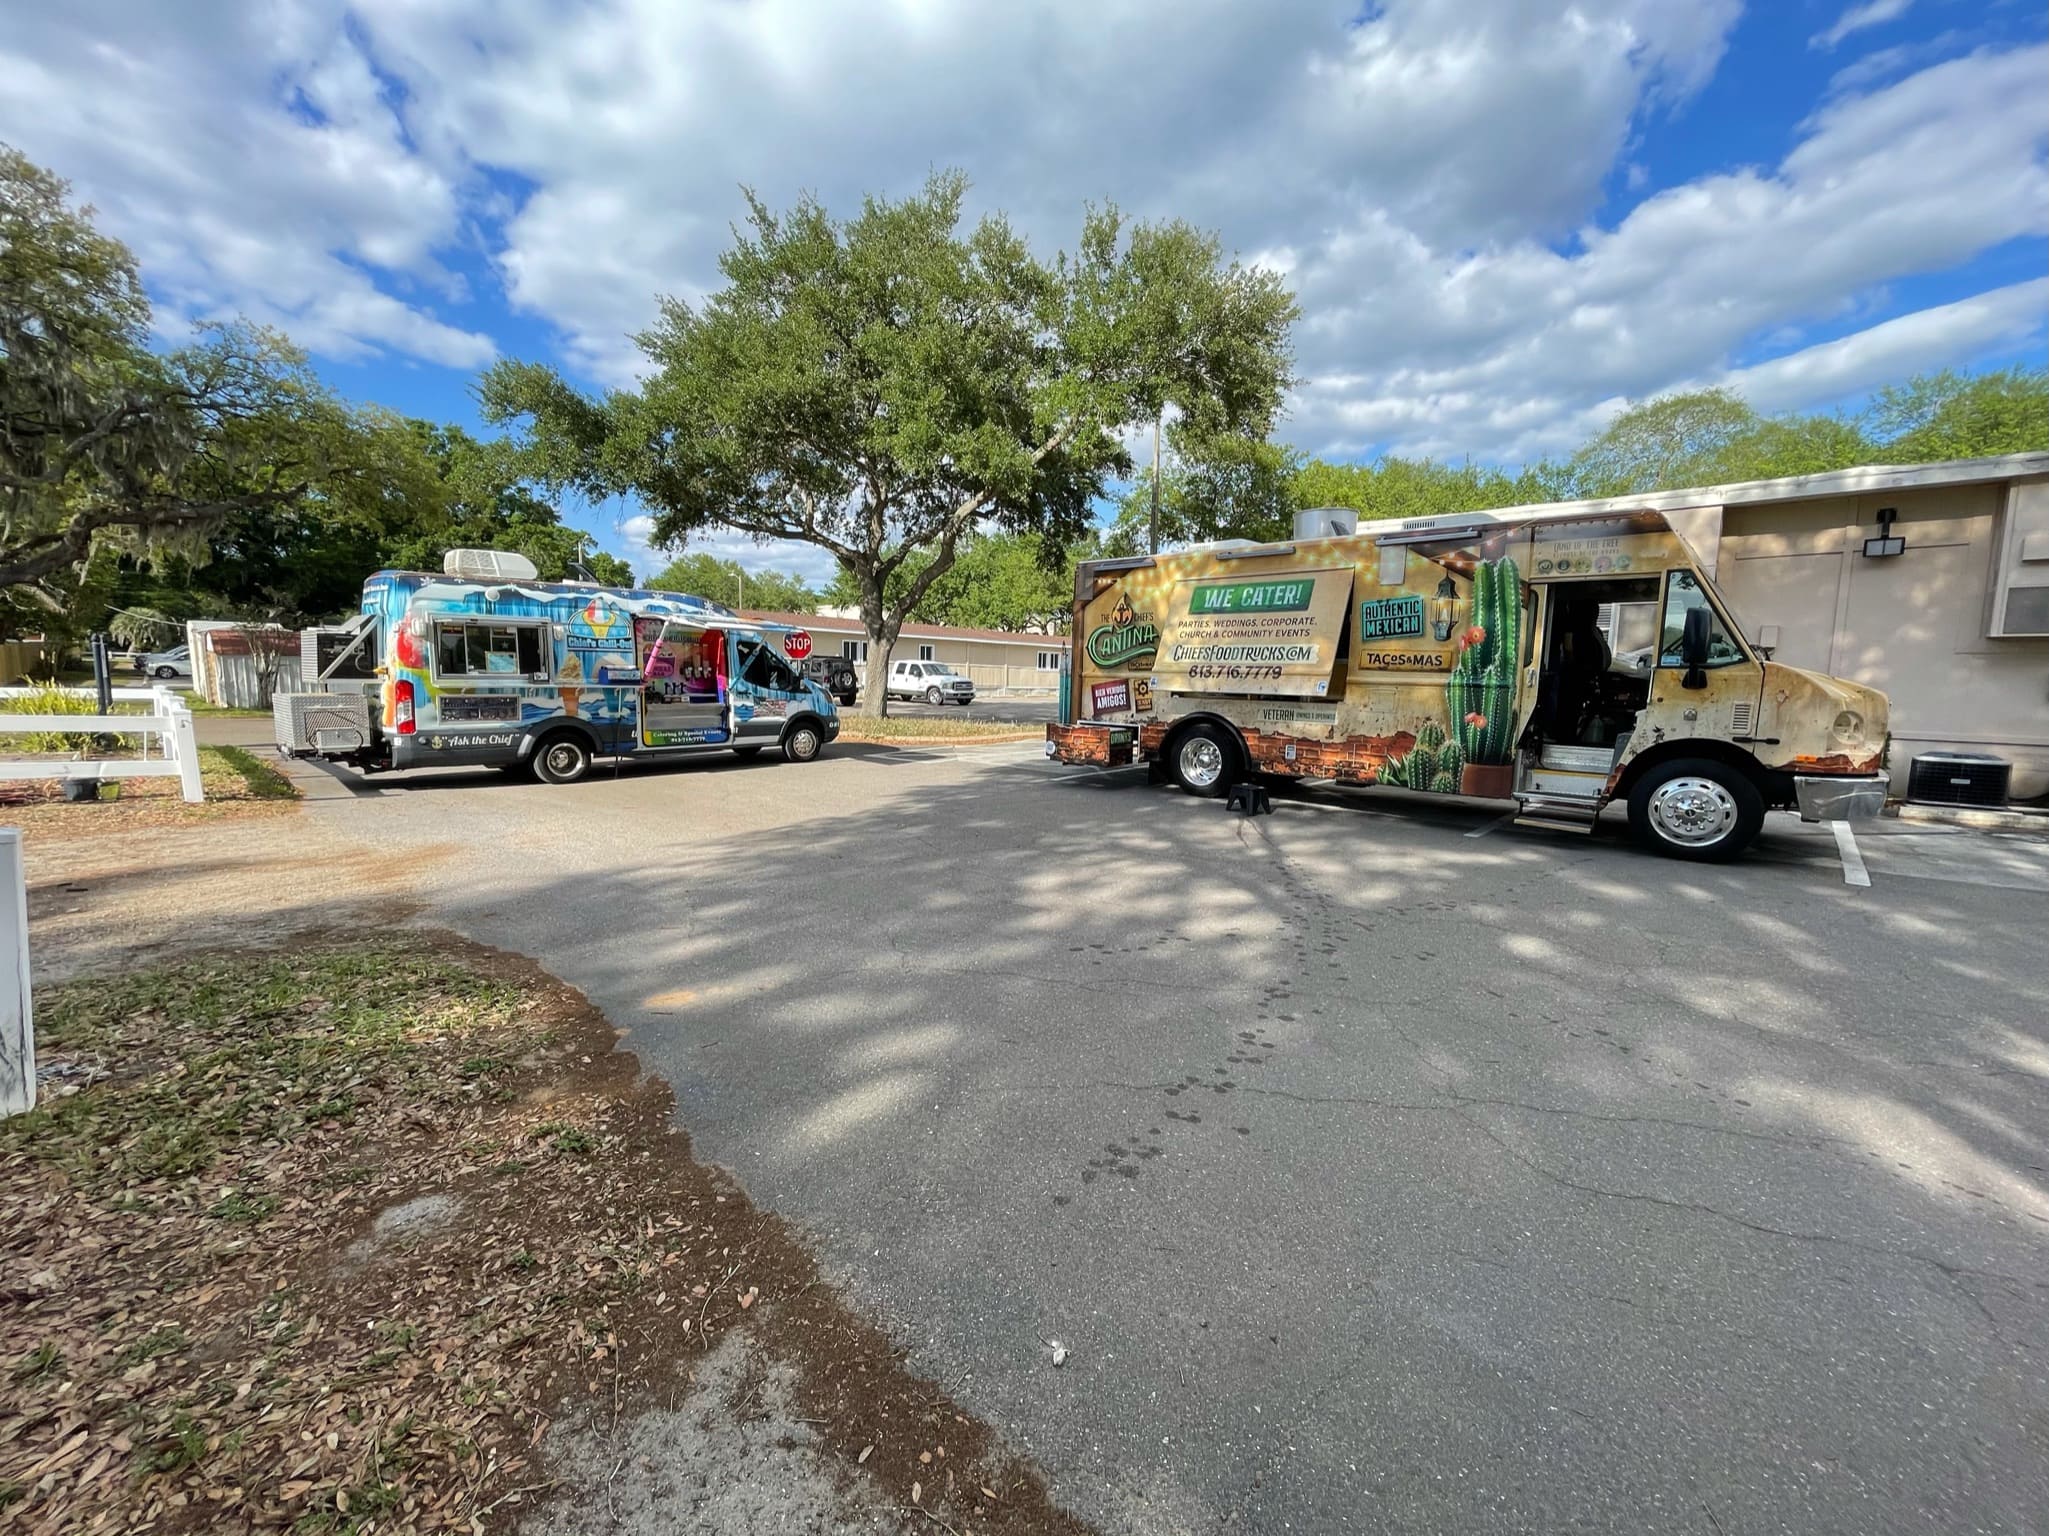 The Chief’s Cantina Food Trucks